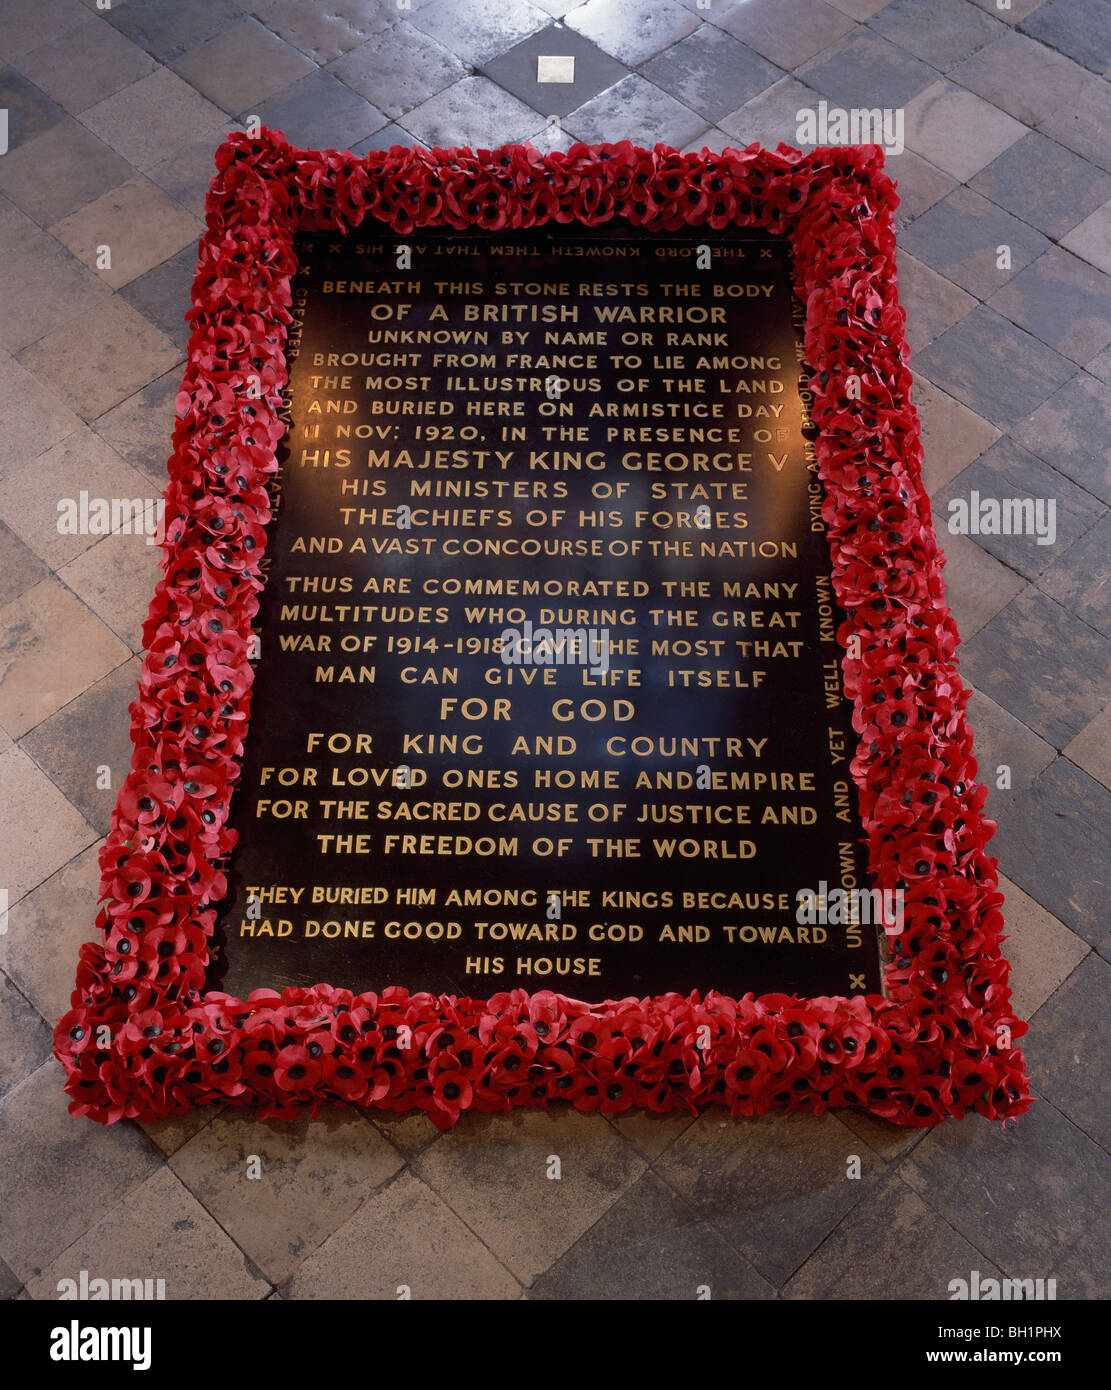 Westminster Abbey London. Tomb of Unknown British Warrior from World War I buried at west end of the nave in 1920. Stock Photo